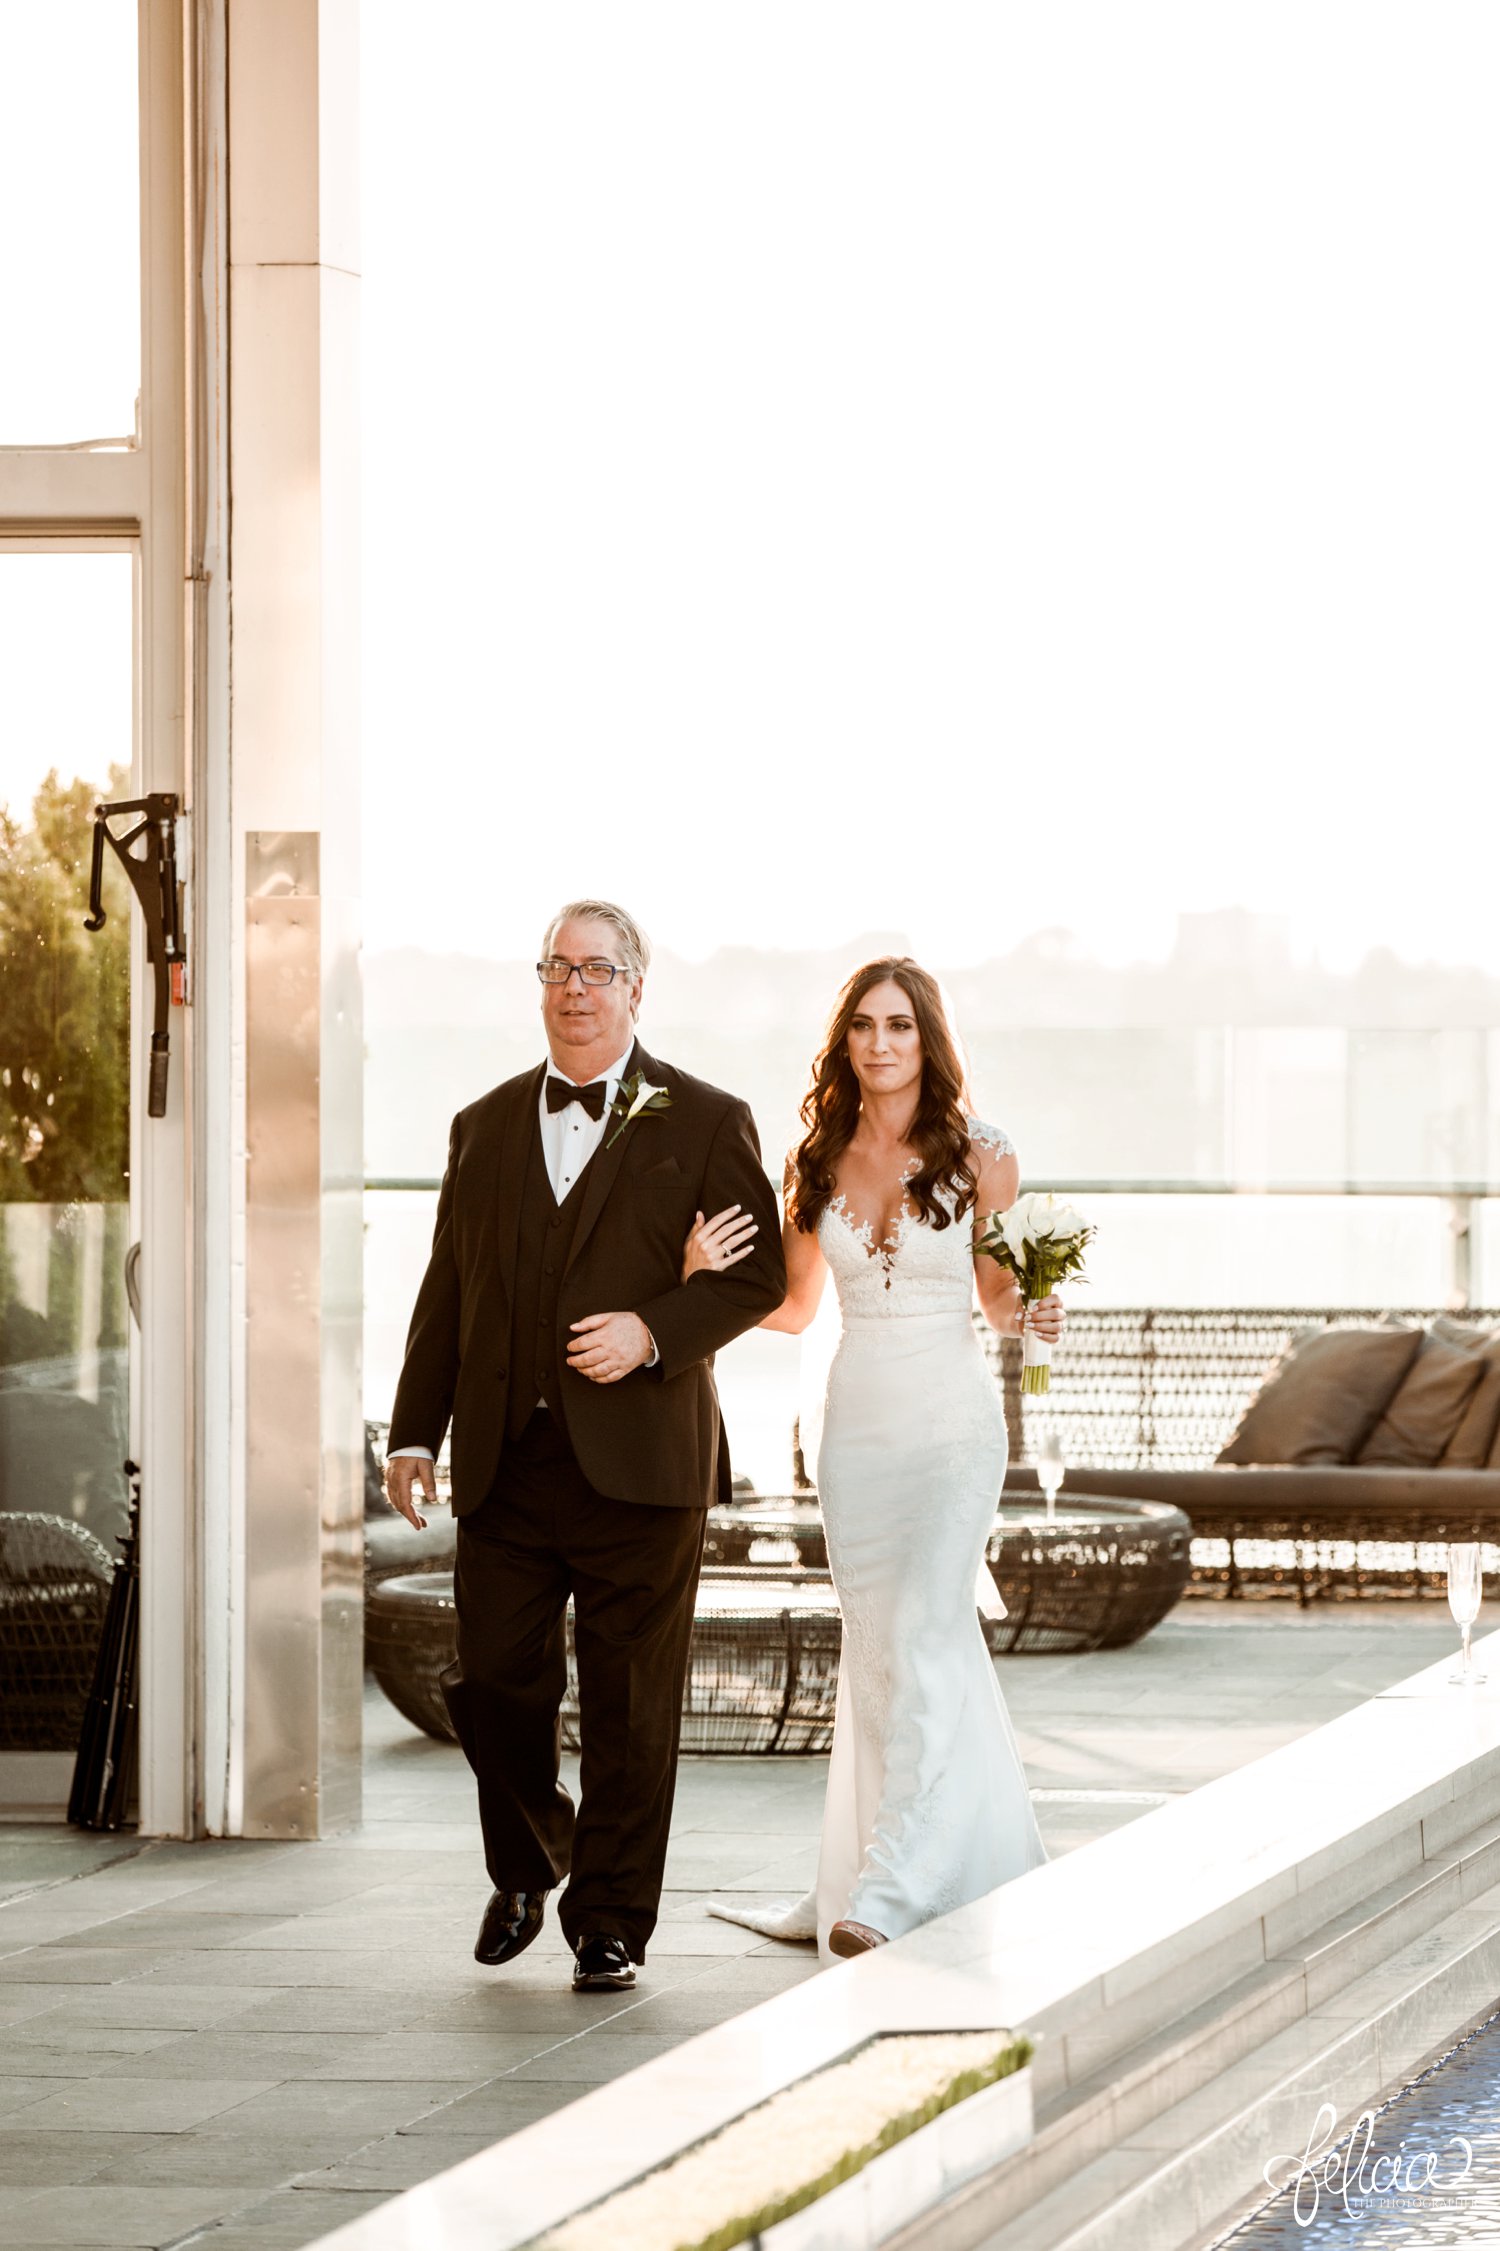 images by feliciathephotographer.com | destination wedding photographer | new york city | ceremony | rooftop | skyline | urban | romantic | classic | walking down the aisle | father of the bride | long white gown | lace detailed neckline | white flowers | golden hour | 